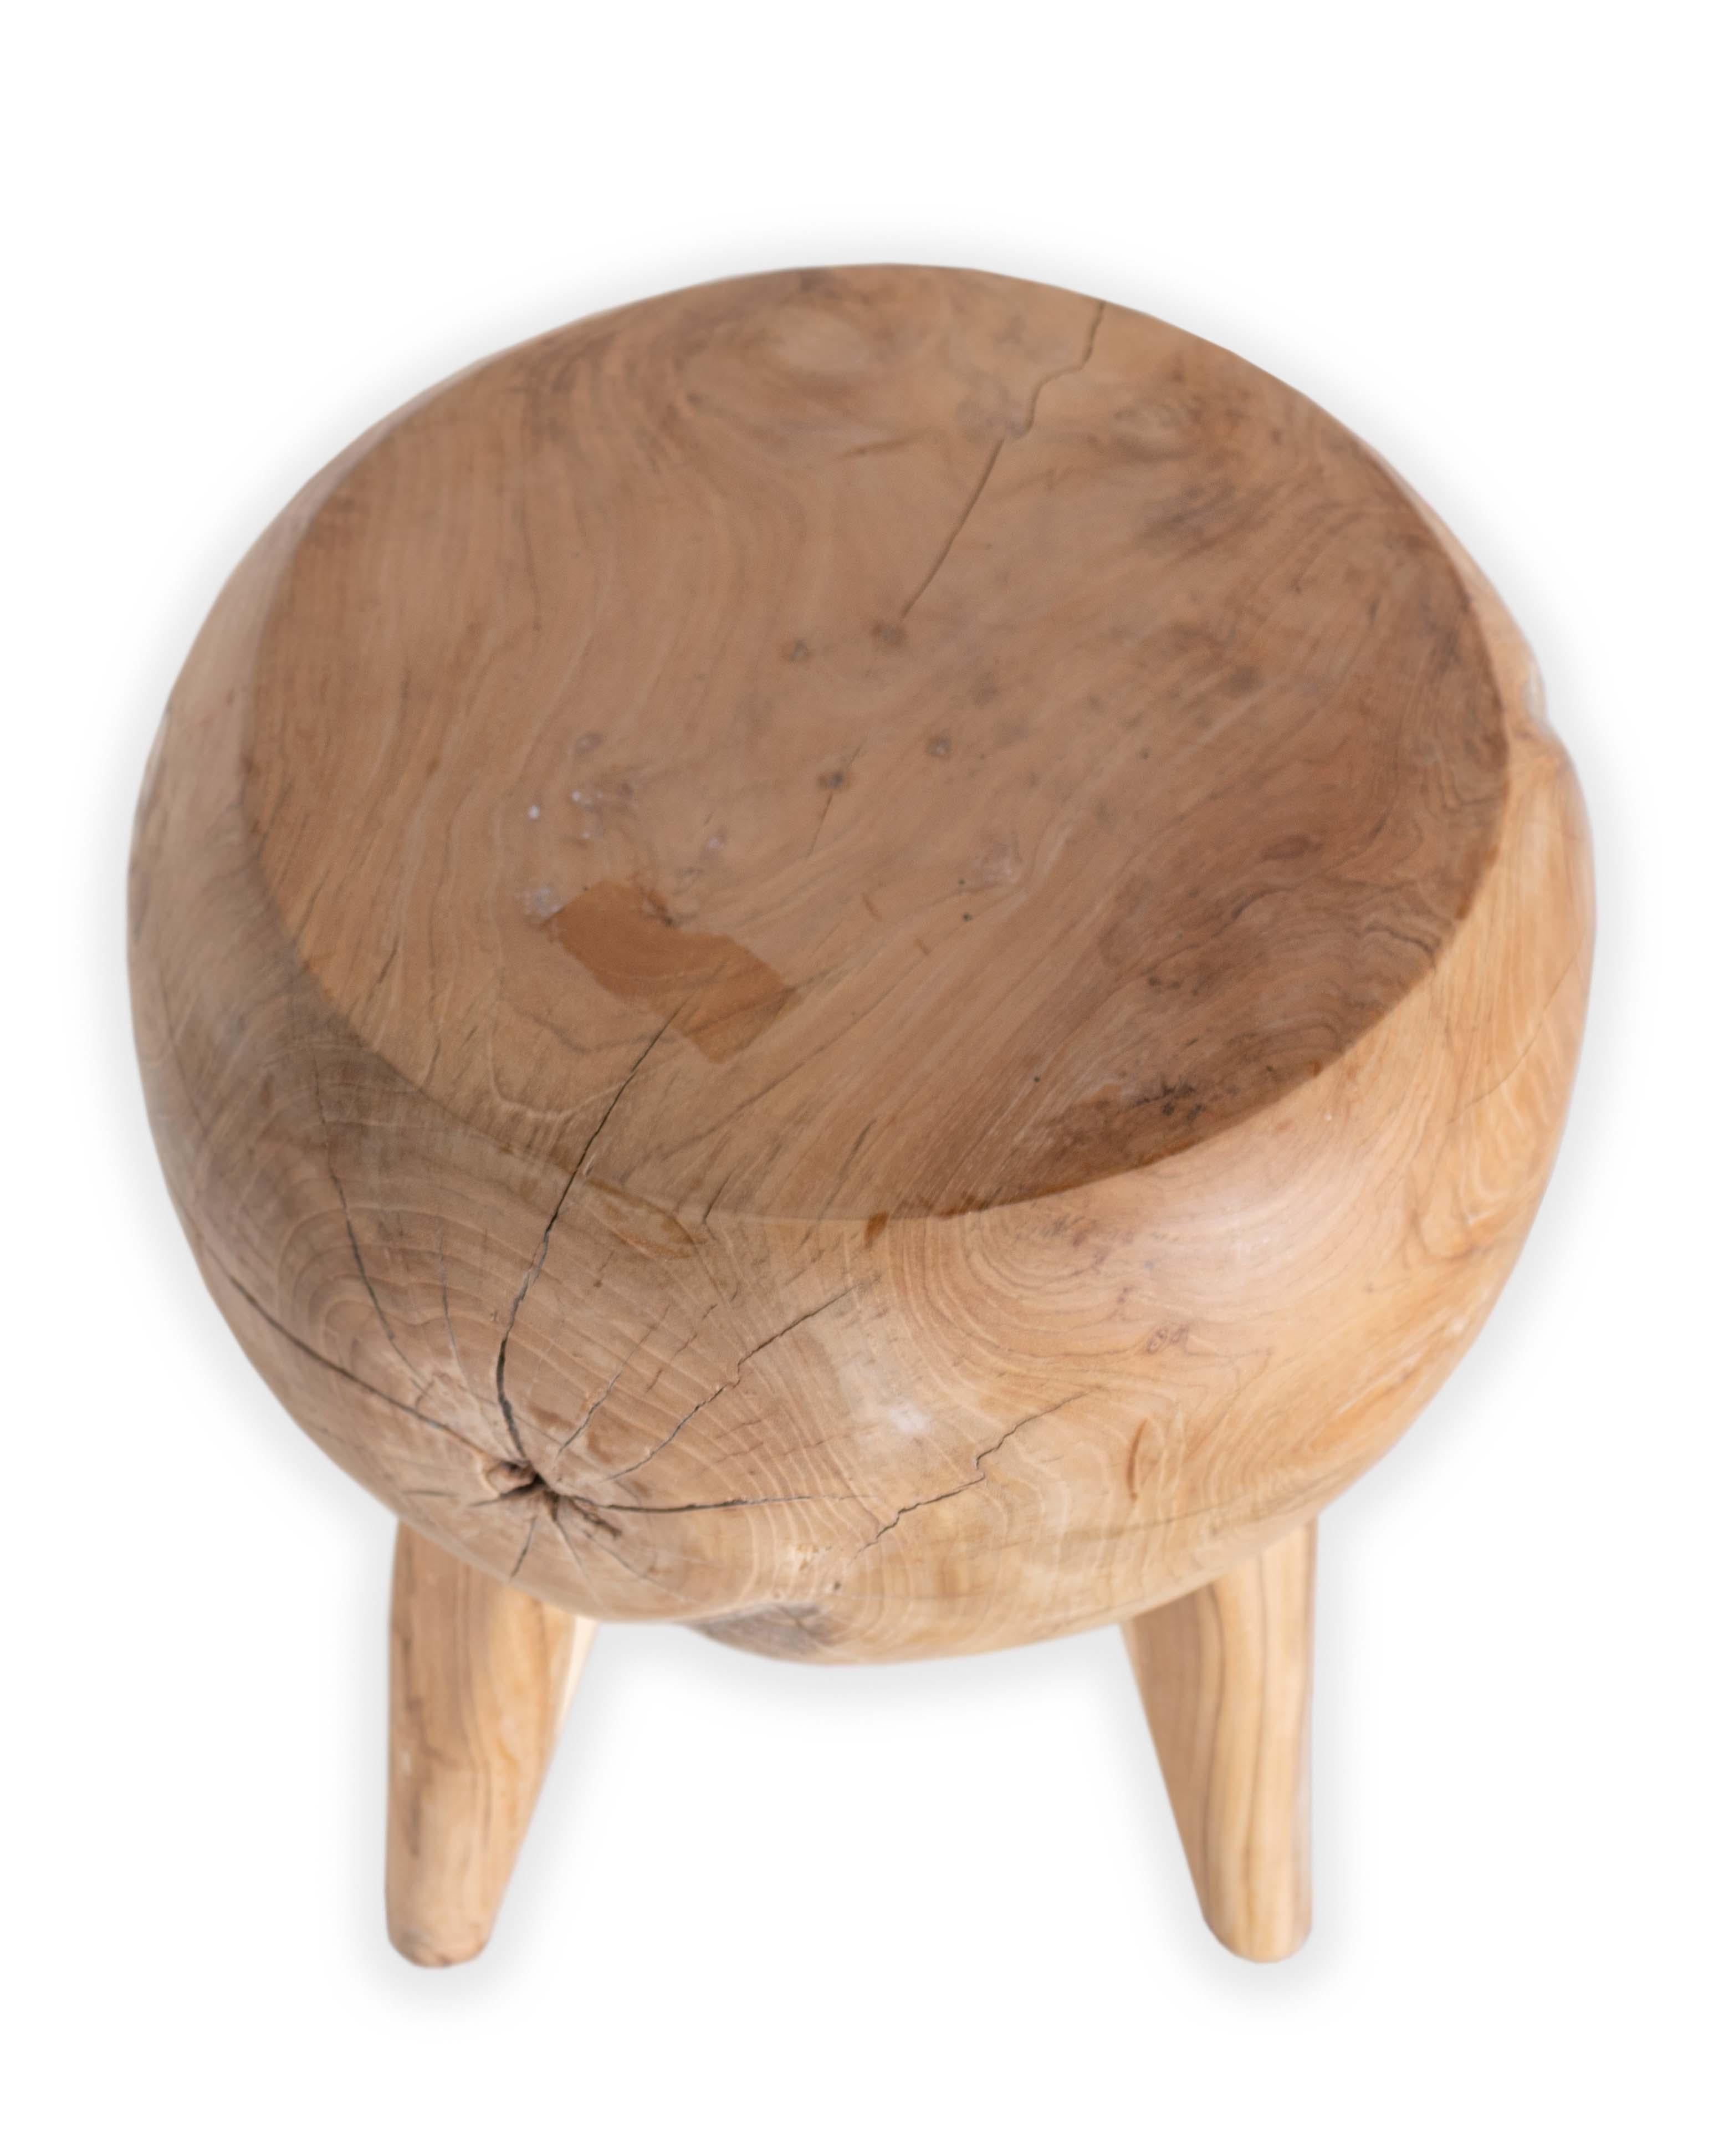 Other Four Leg Wood End Table/Stool For Sale